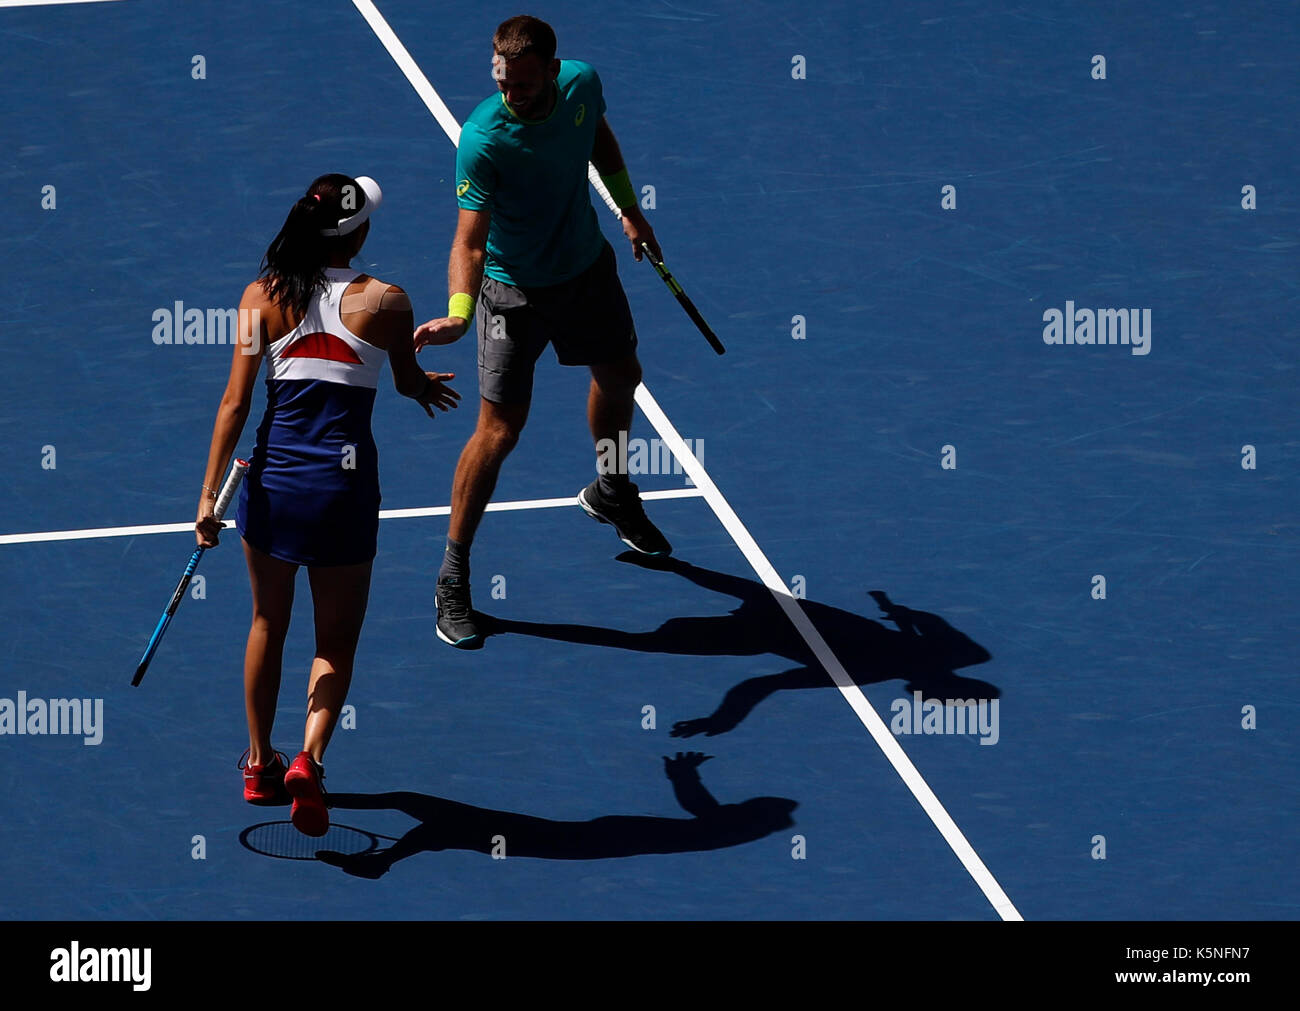 New York, USA. 9th Sep, 2017. Hao-Ching Chan (L) of Chinese Taipei and Michael Venus of New Zealand compete against Martina Hingis of Switzerland and Jamie Murray of Great Britain during the mixed doubles final match at the 2017 US Open in New York, the United States, Sept. 9, 2017. Martina Hingis and Jamie Murray won 2-1 to claim the title. Credit: Qin Lang/Xinhua/Alamy Live News Stock Photo